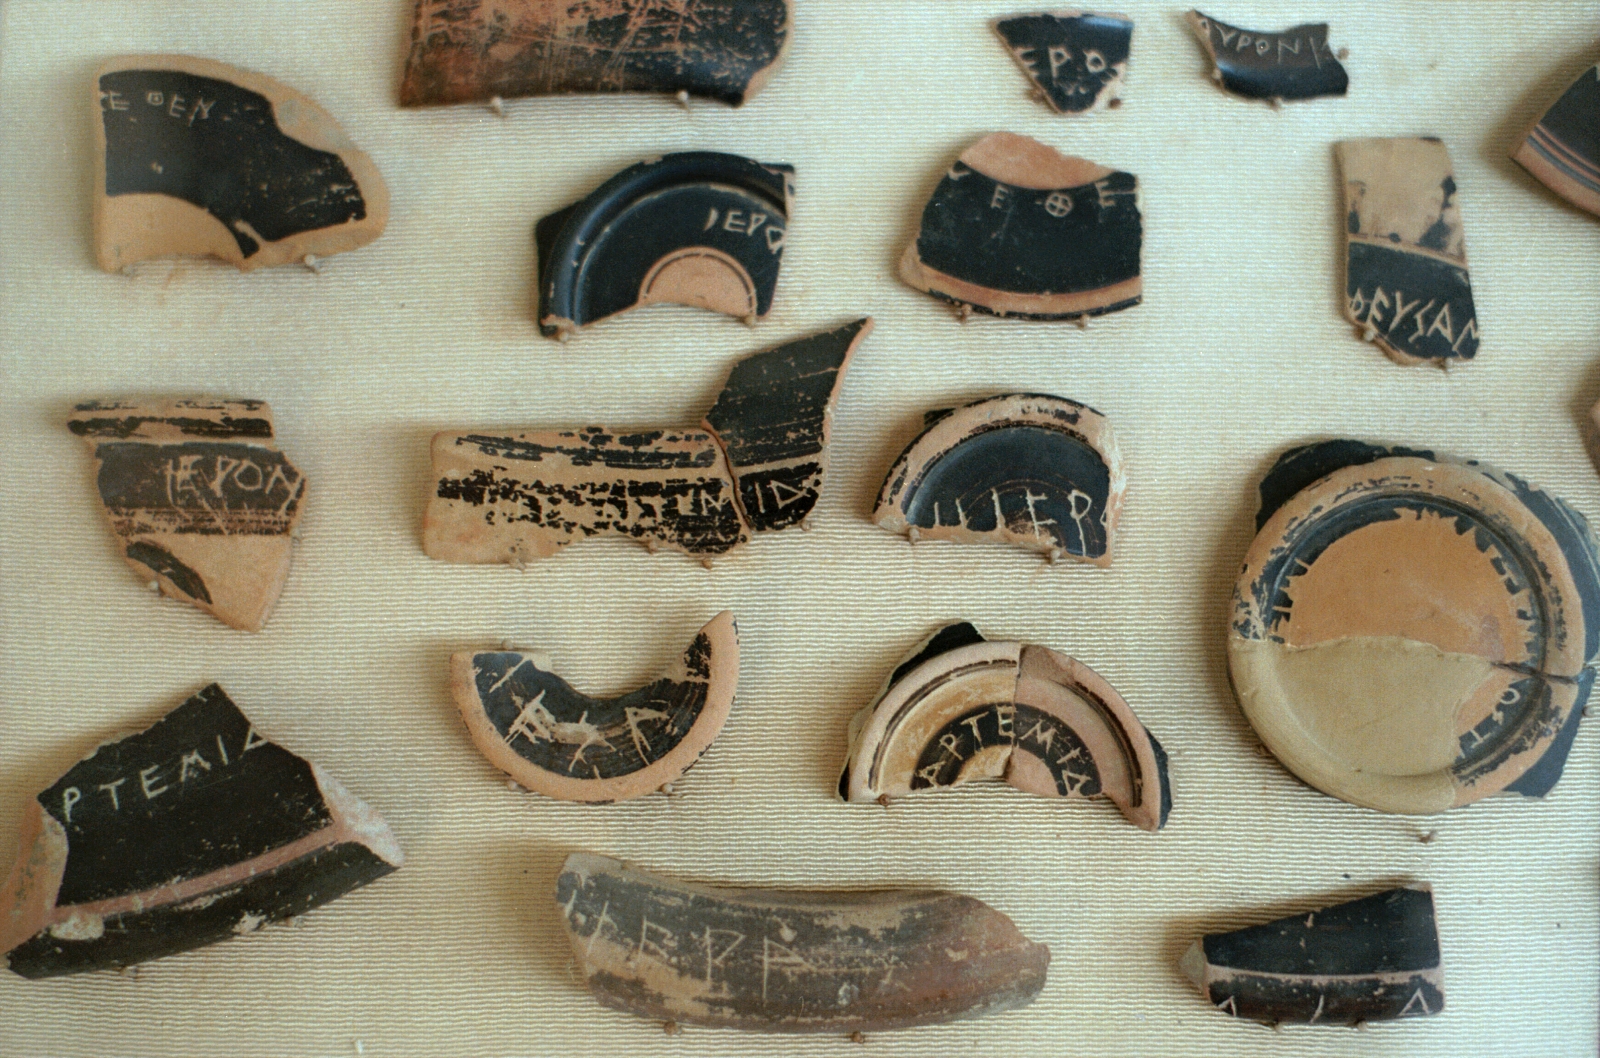 Pottery shards were used by ancient Greeks before toilet paper was invented